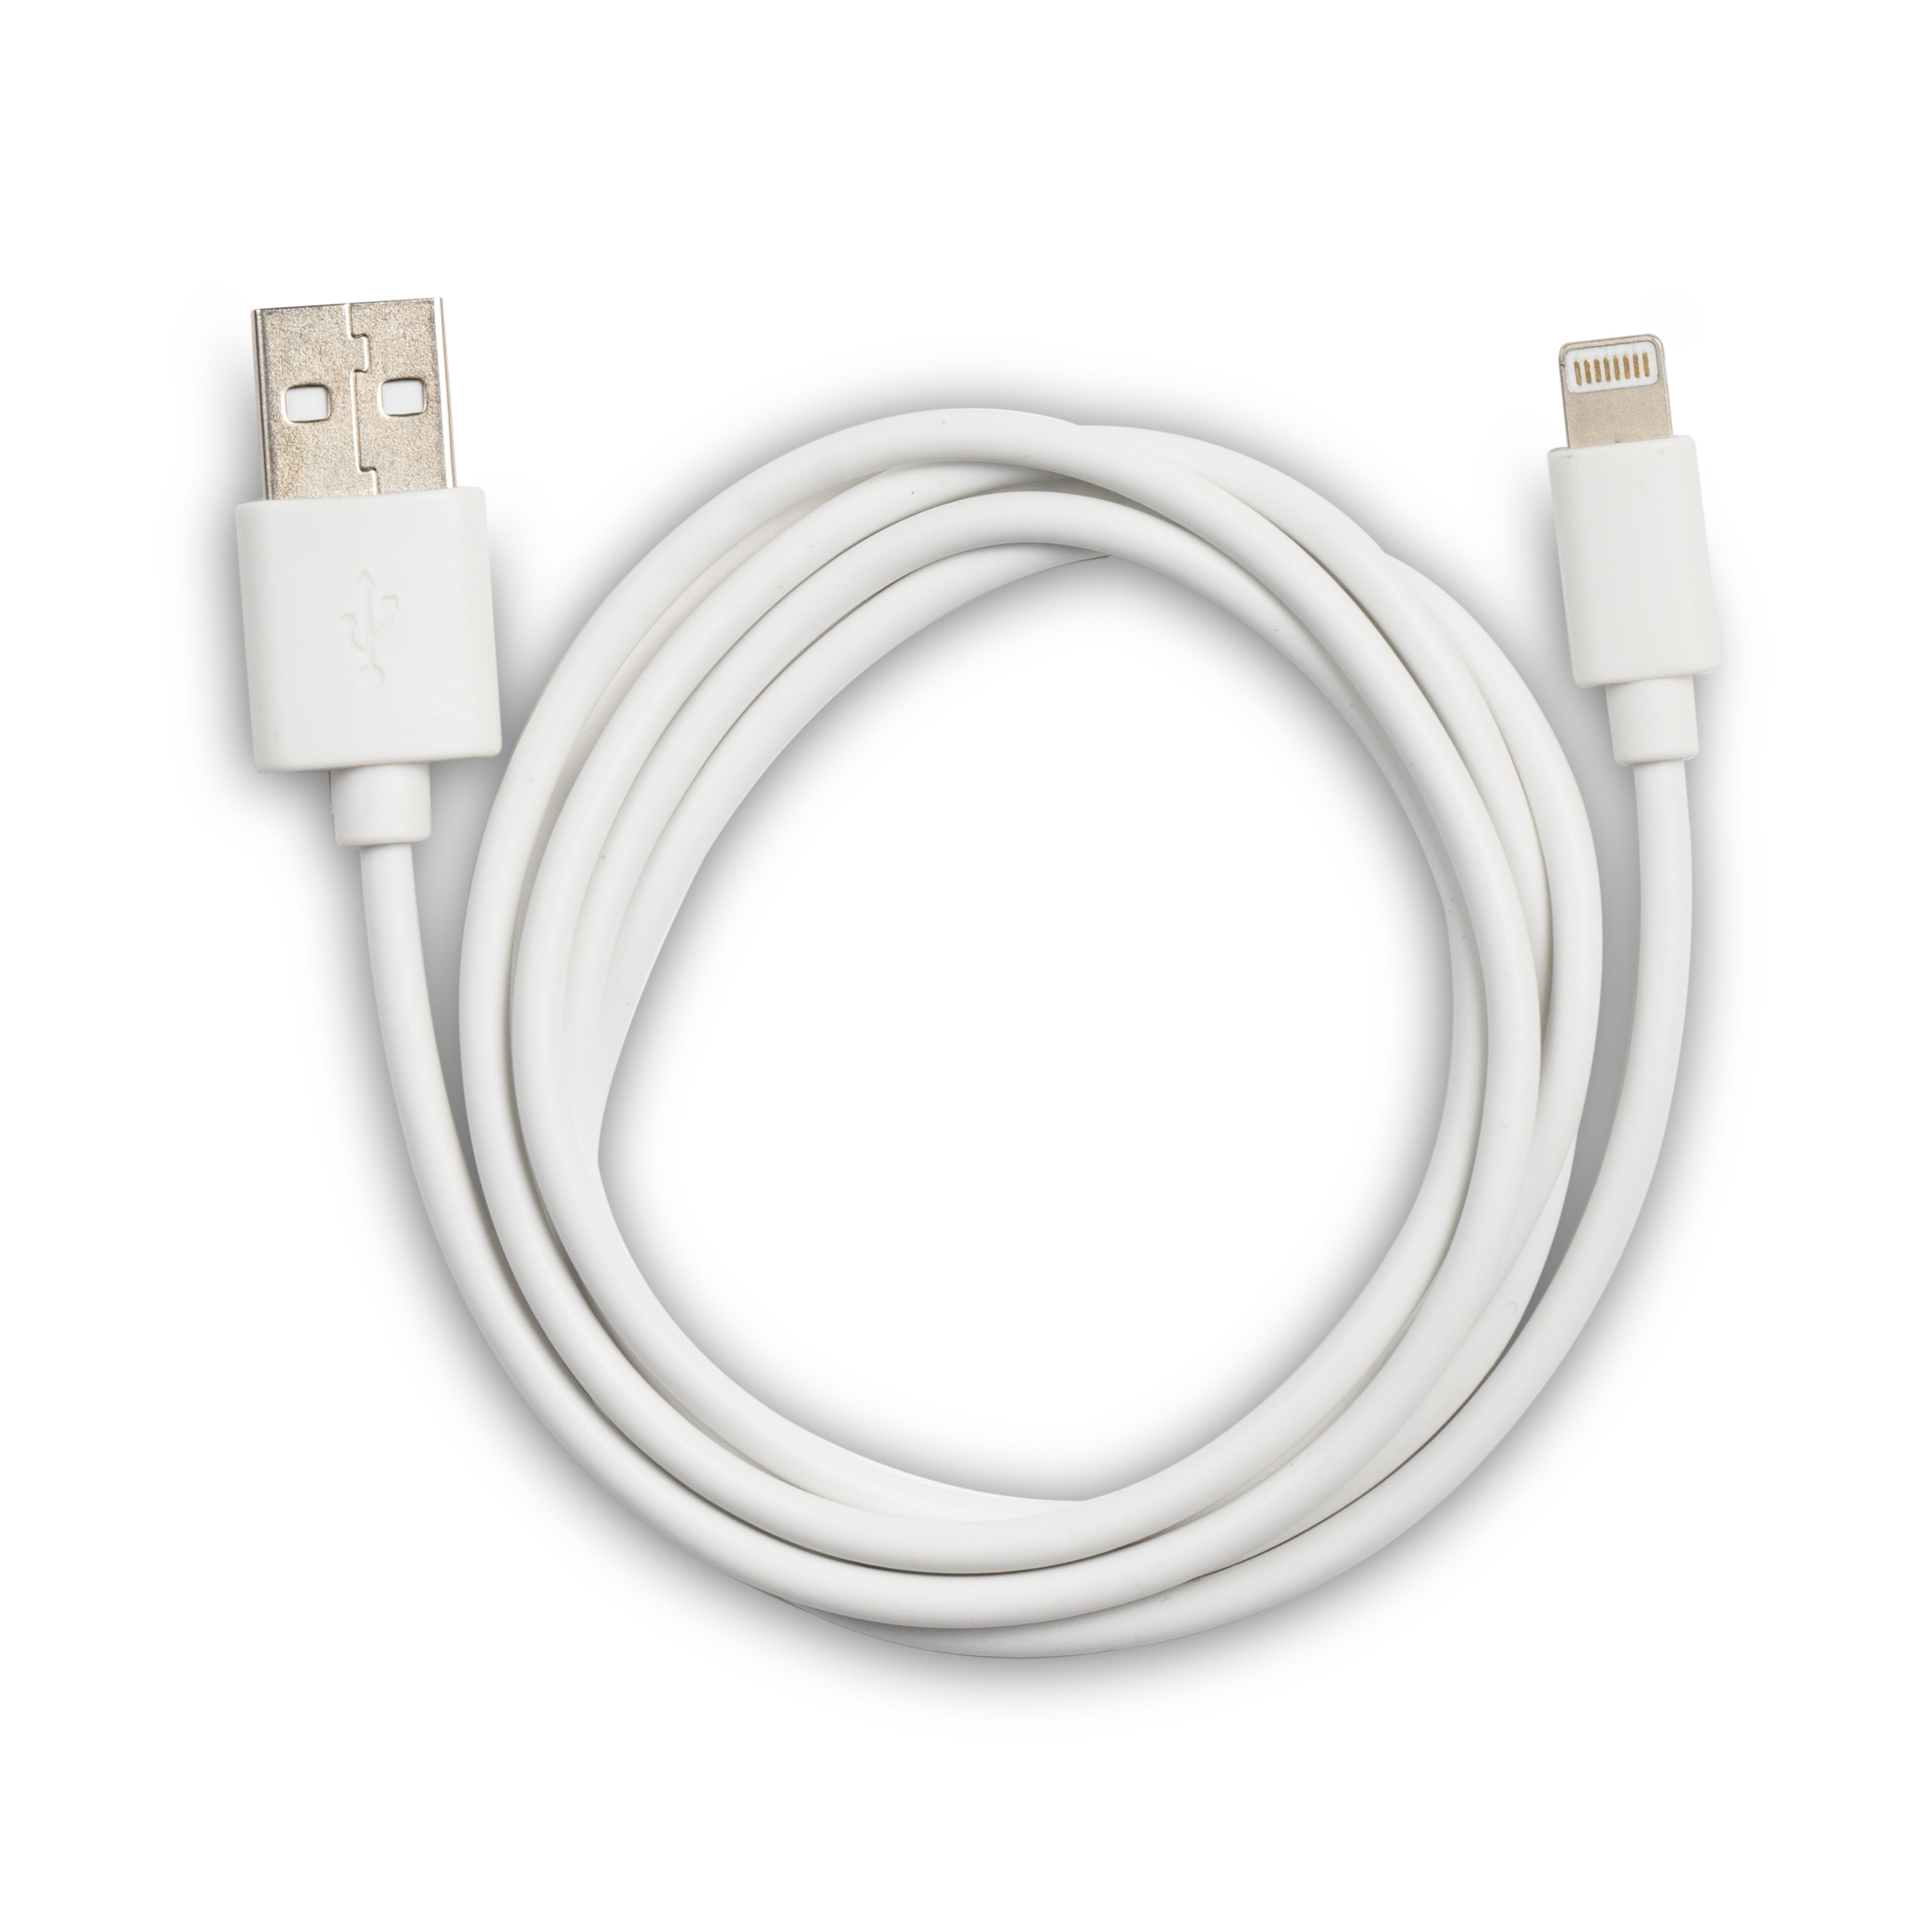 Cable Apple USB-C a Ligthning 2m - Blanco